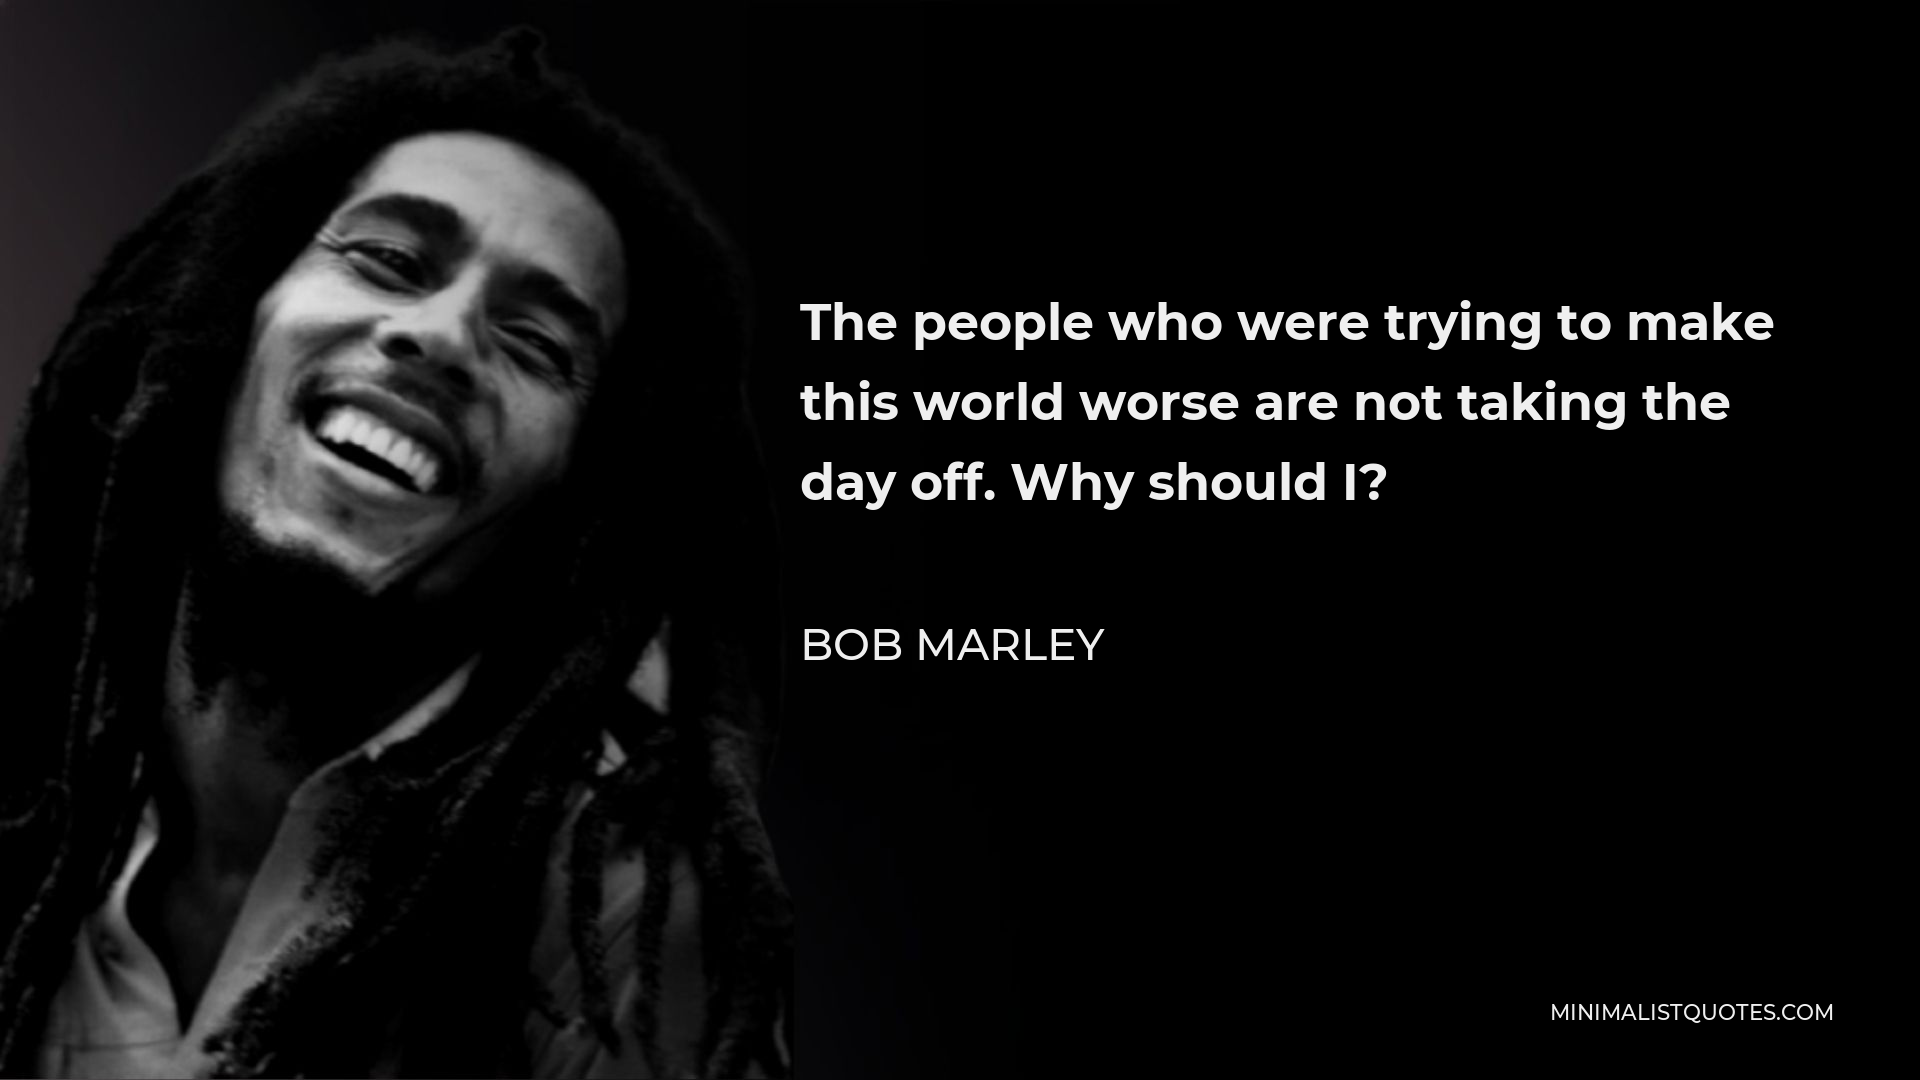 Bob Marley Quote - The people who were trying to make this world worse are not taking the day off. Why should I?